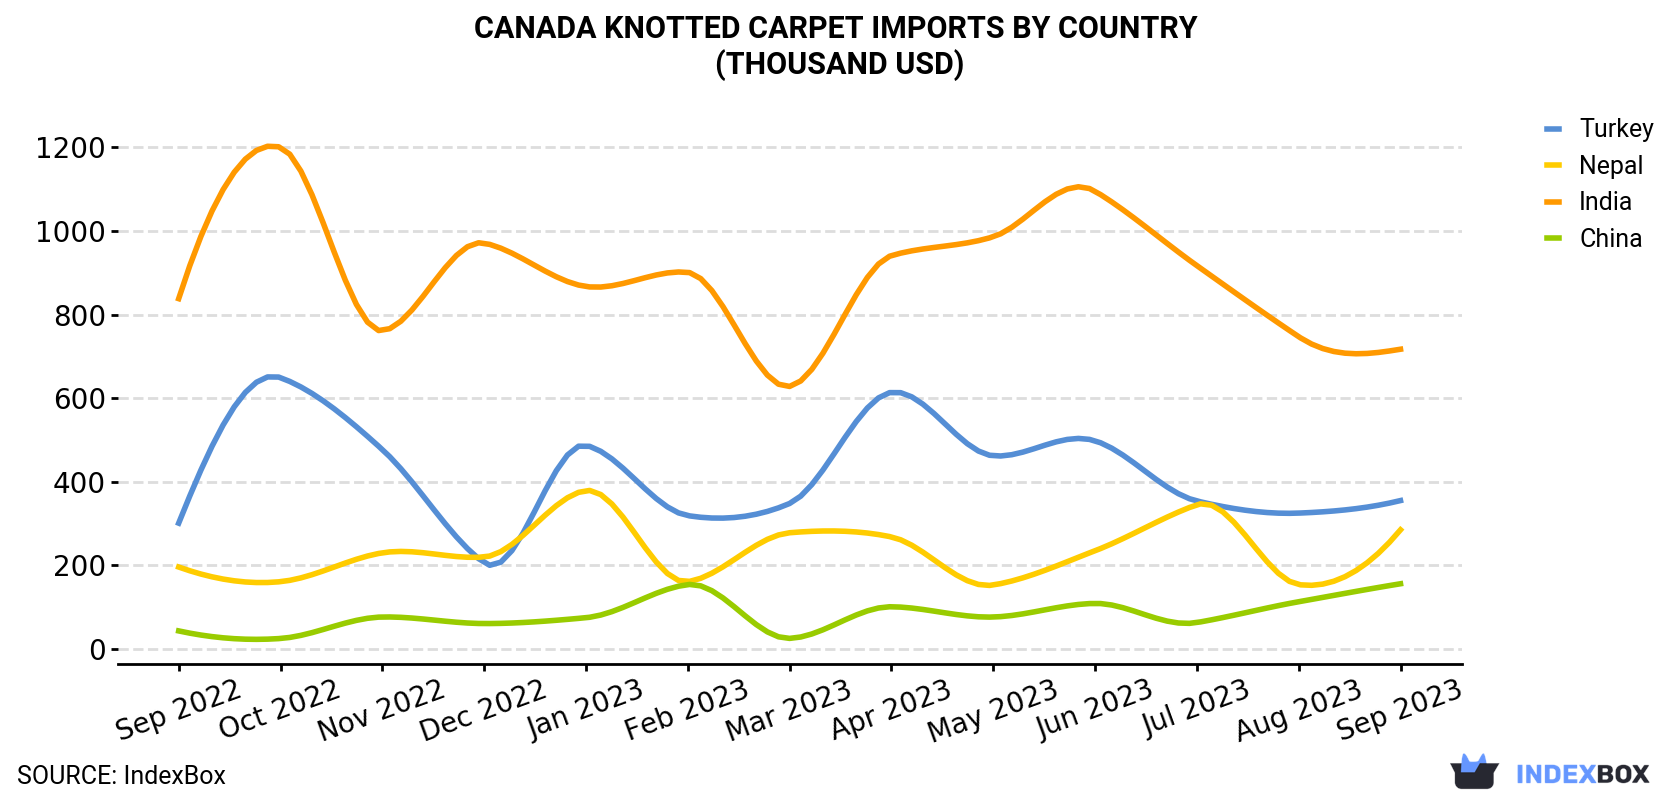 Canada Knotted Carpet Imports By Country (Thousand USD)